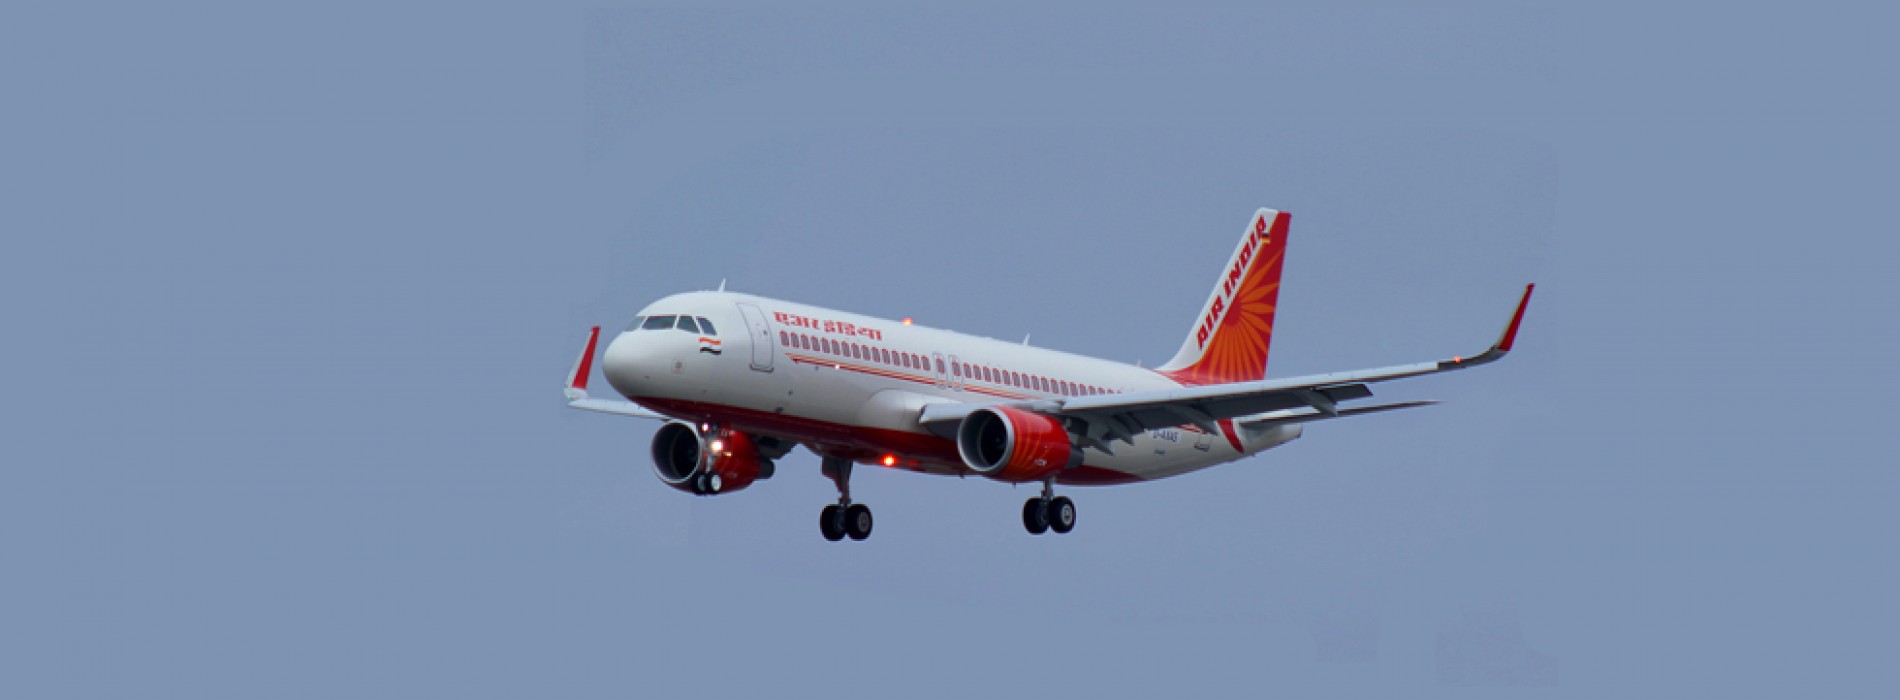 Air India puts 57 ‘overweight’ crew on ground duty